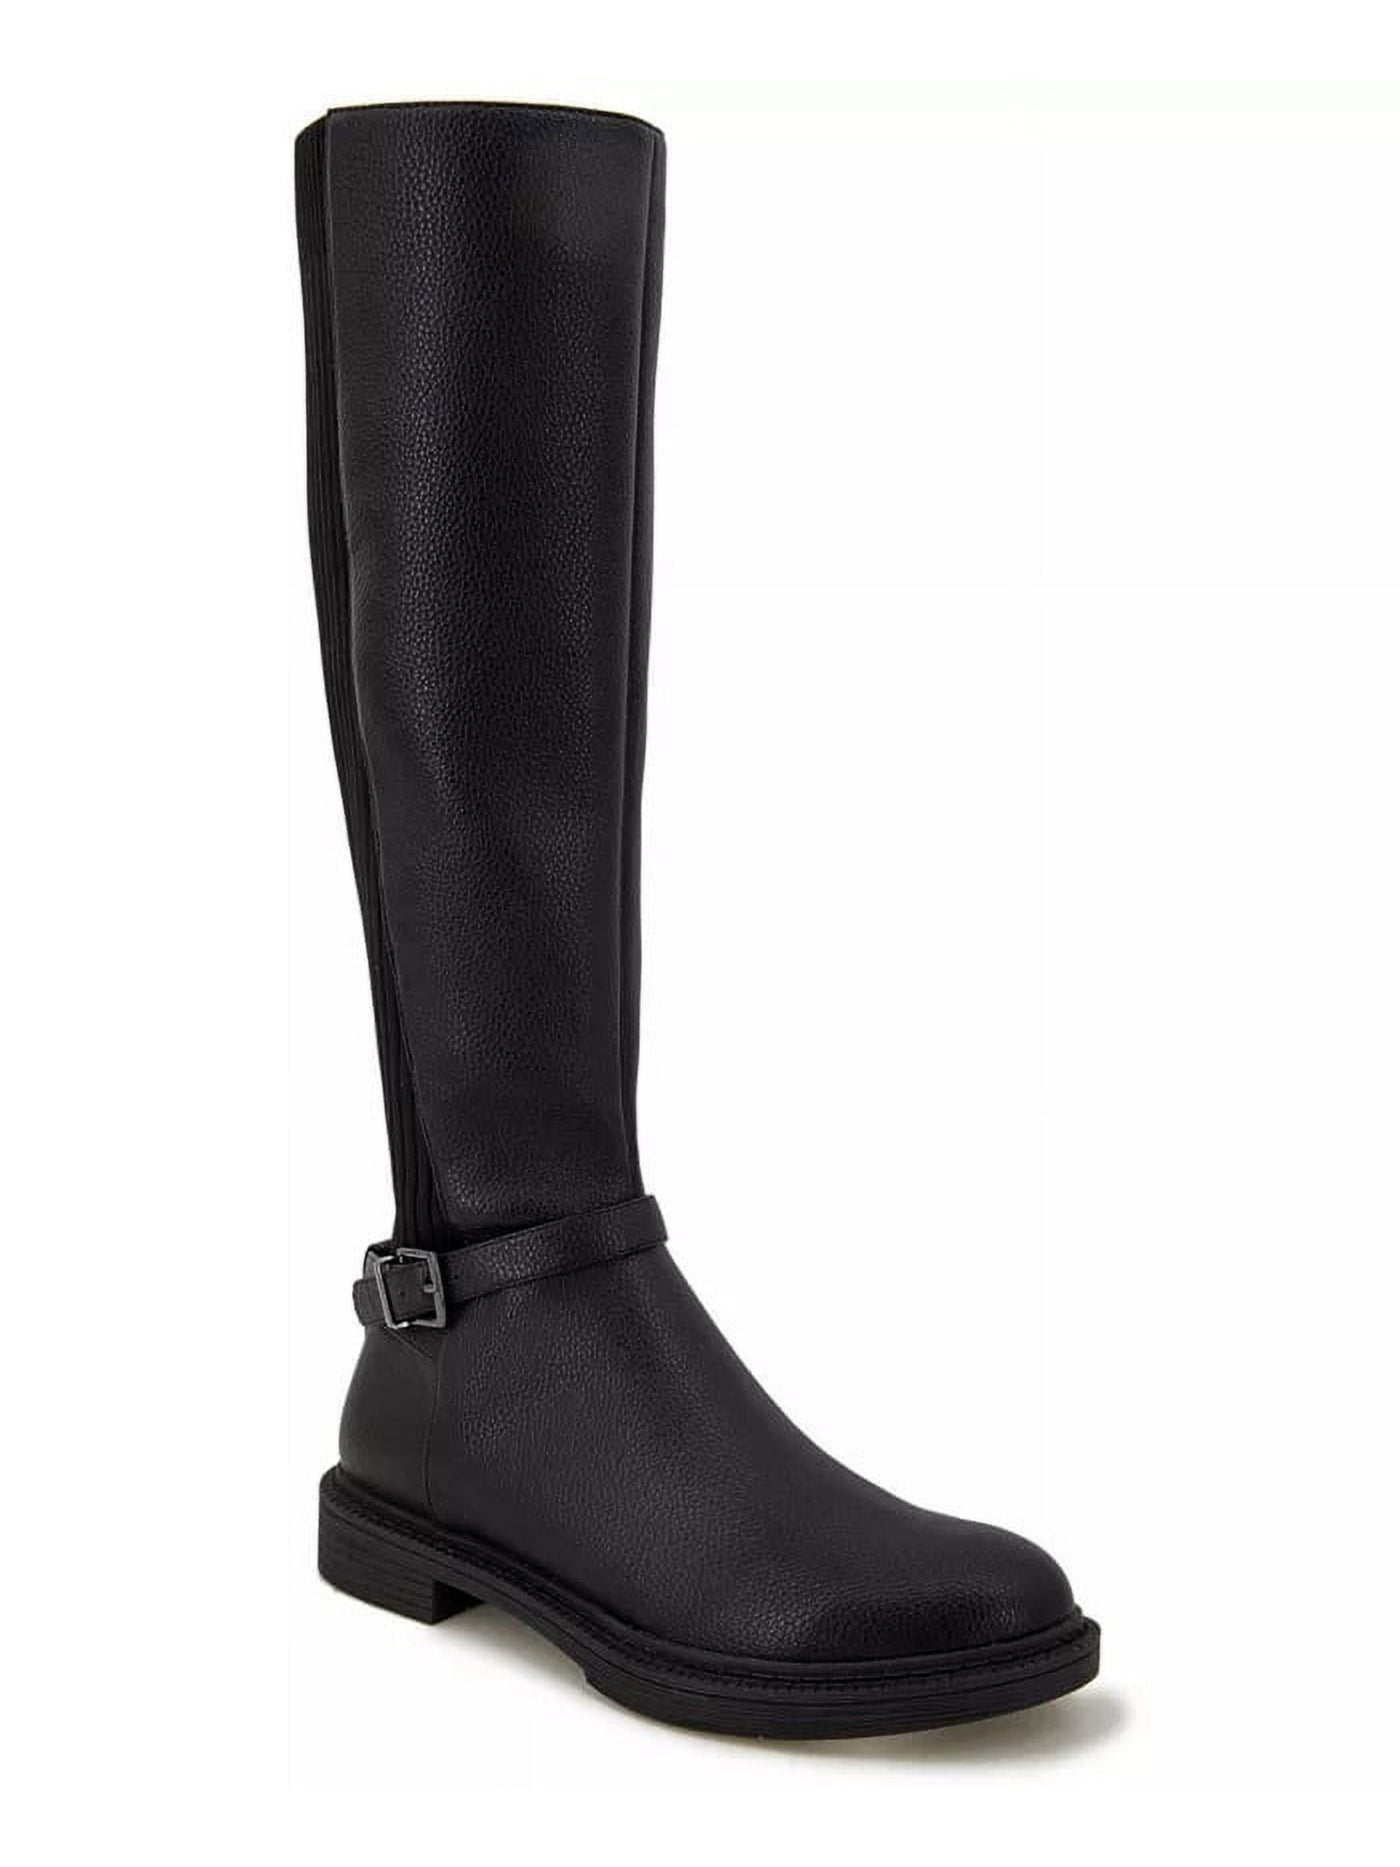 REACTION KENNETH COLE Womens Black 16 Shaft Buckle Accent Lug Sole Winona Round Toe Block Heel Zip-Up Riding Boot 5.5